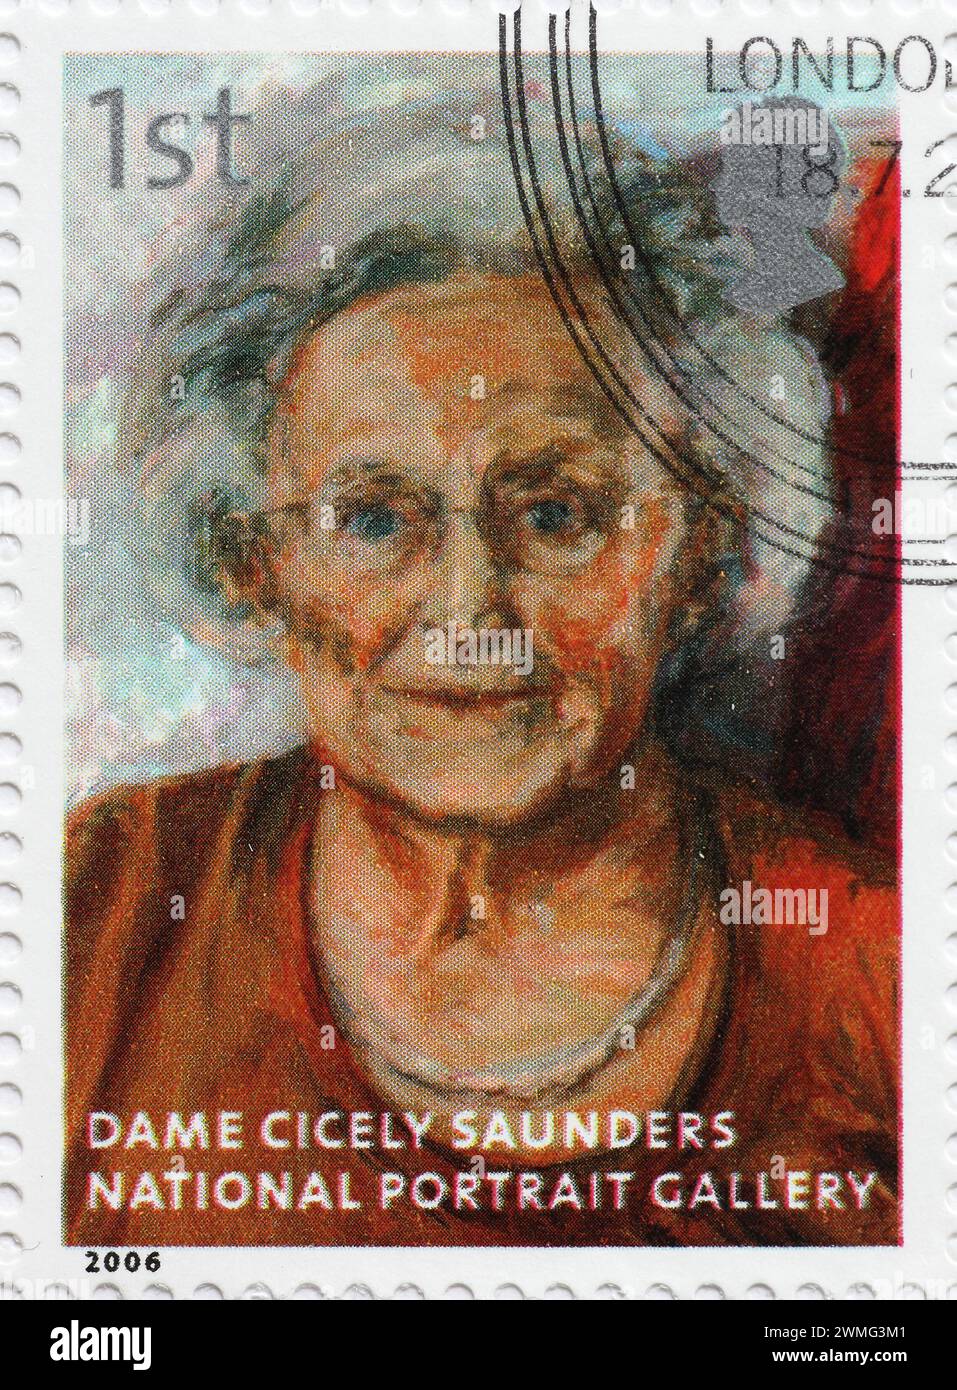 Dame Cicely Saunders from the National Portrait Gallery on postage stamp Stock Photo